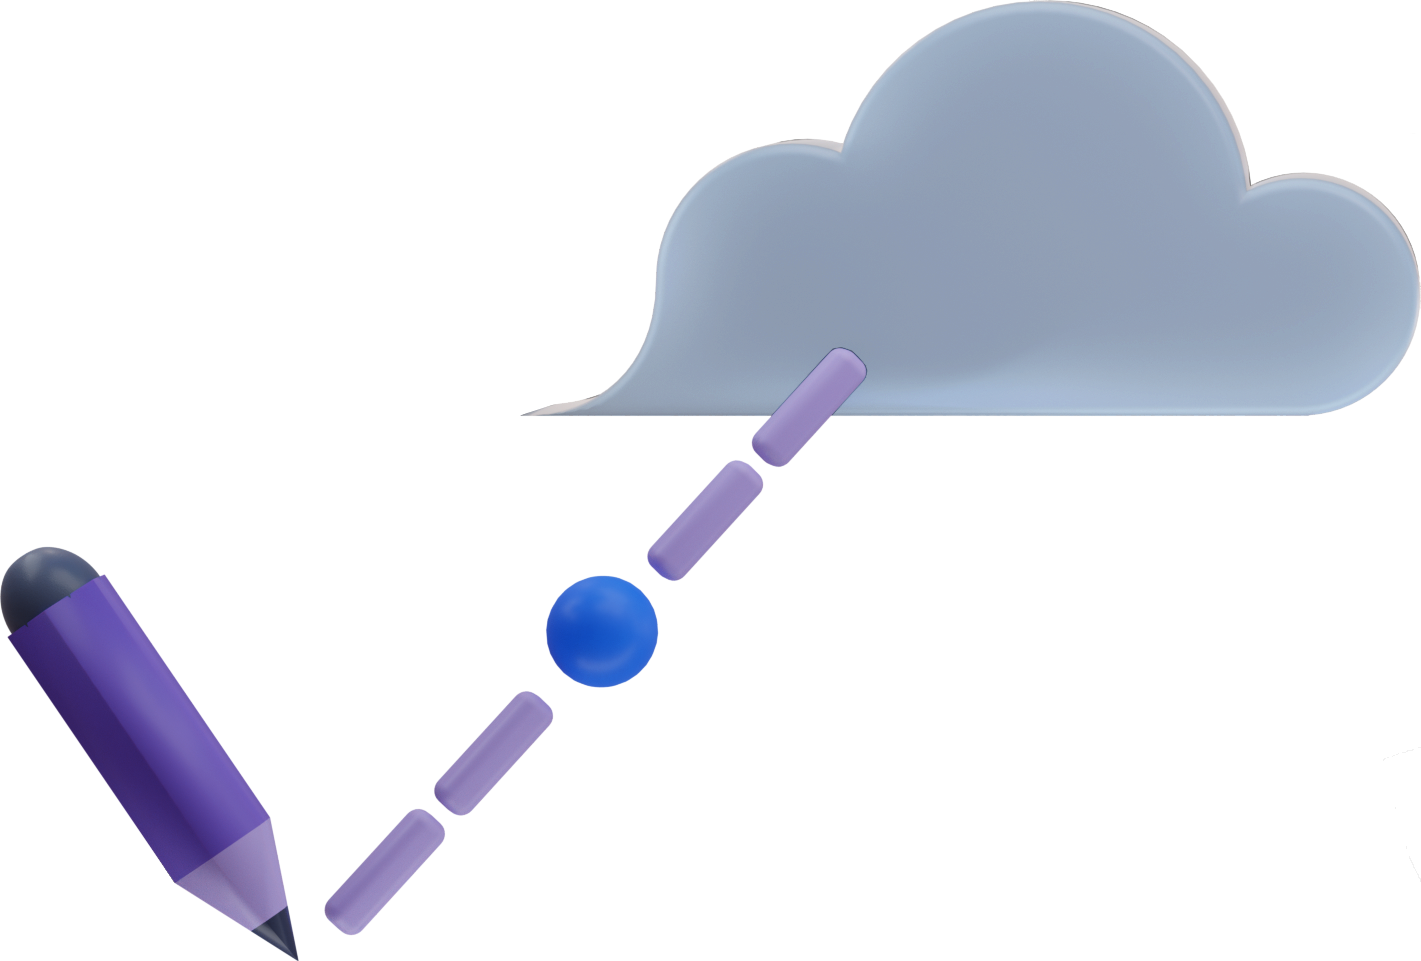 a pencil drawing a downward dash line, connecting a cloud to a point